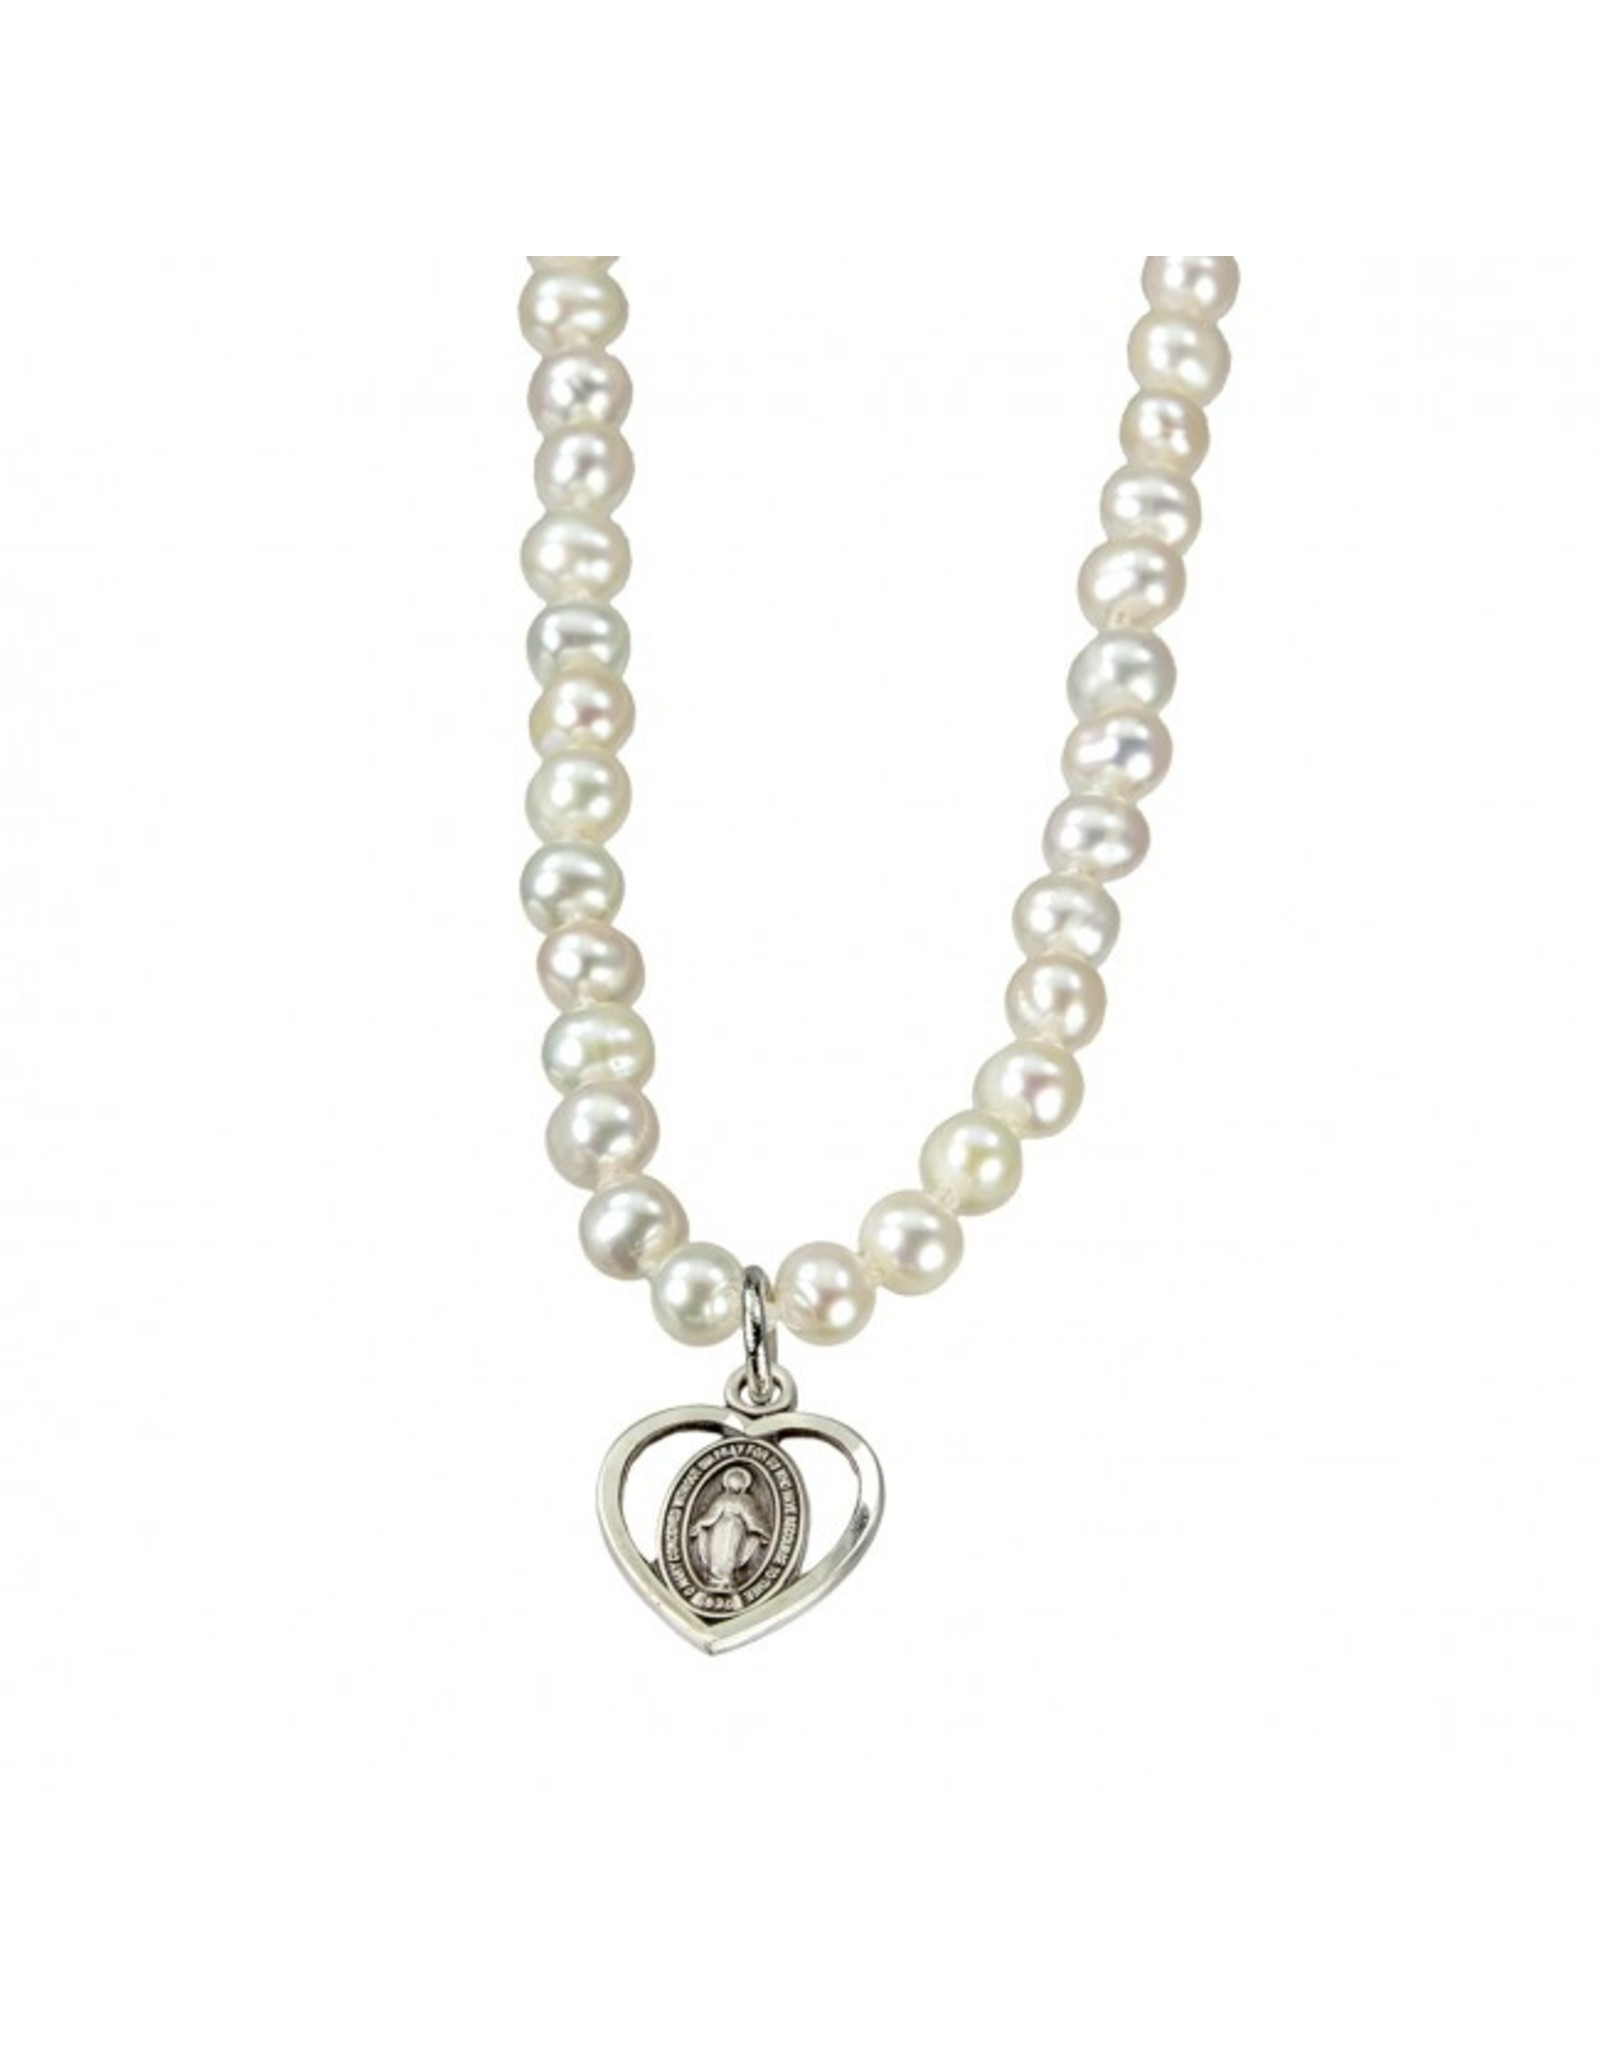 HMH Freshwater Pearl Necklace with Sterling Silver Miraculous Heart